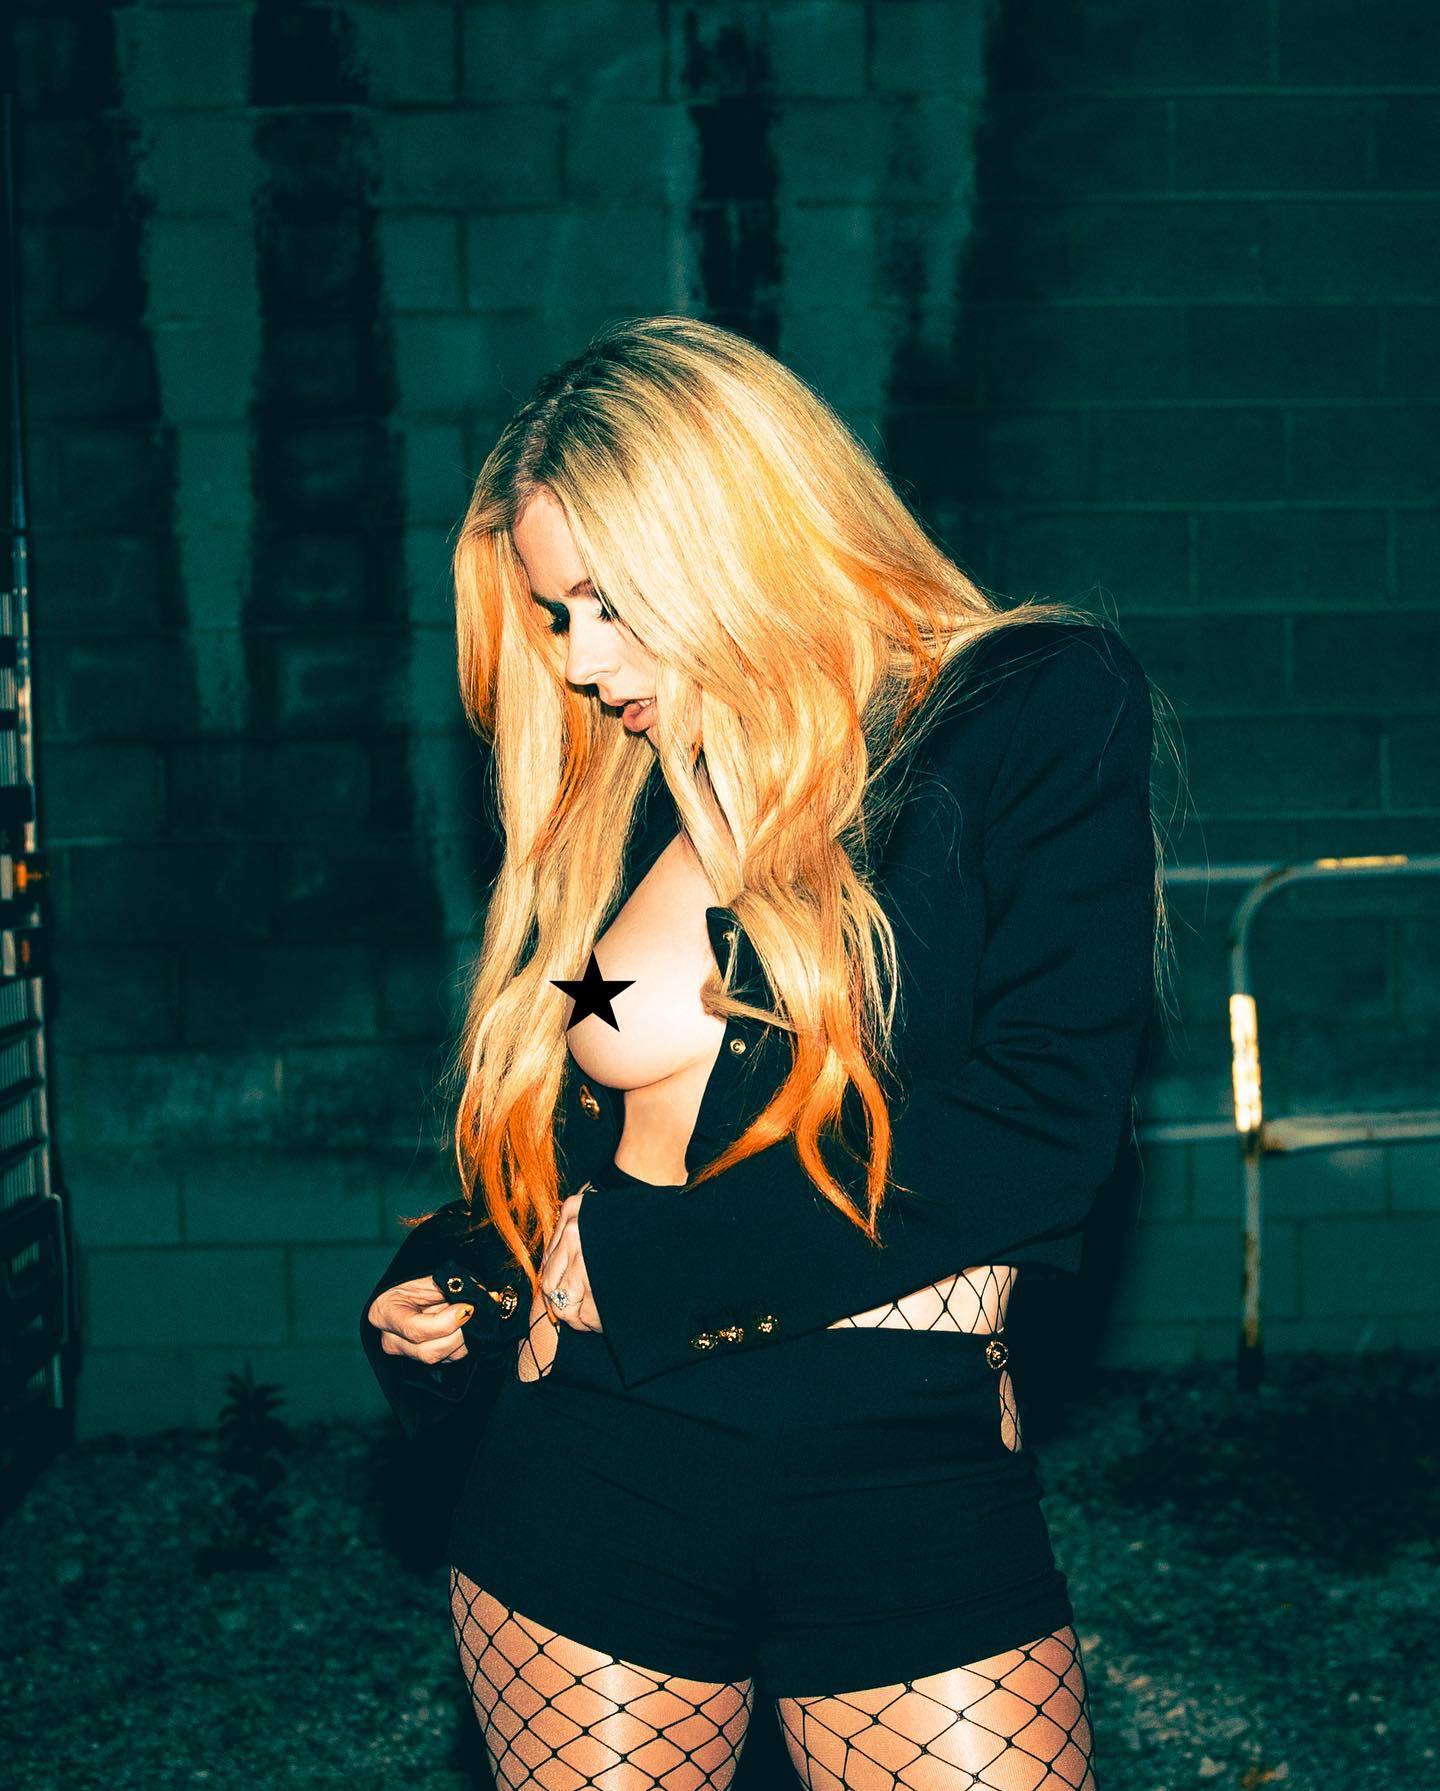 Avril Lavigne tests the limits of Instagram's no-nudity policy - Other Crap